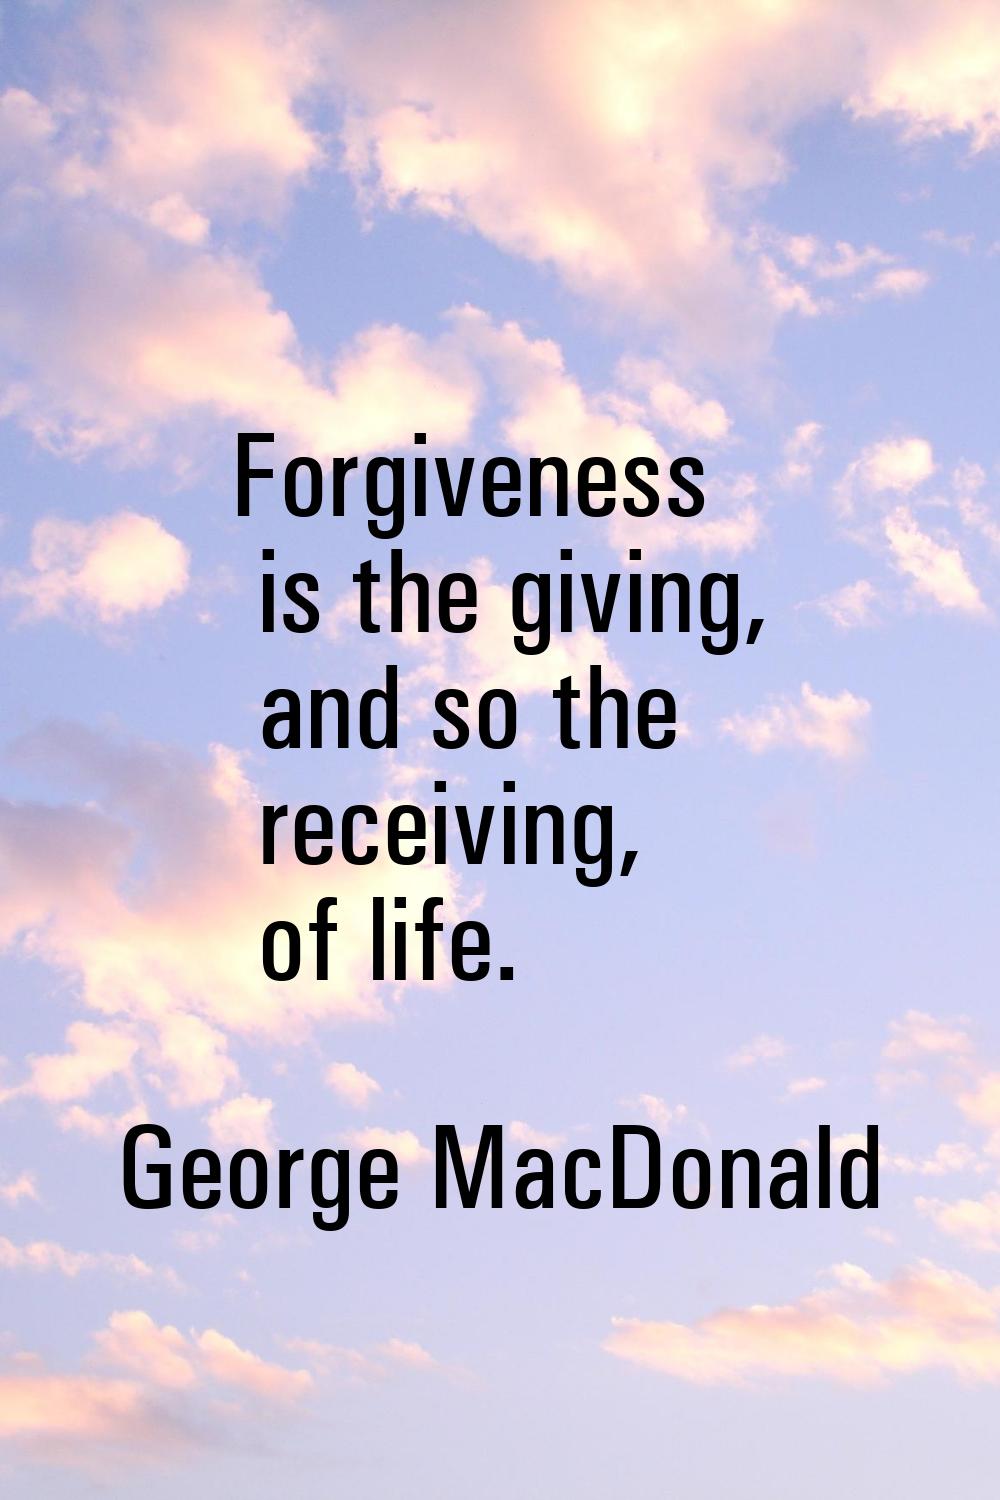 Forgiveness is the giving, and so the receiving, of life.